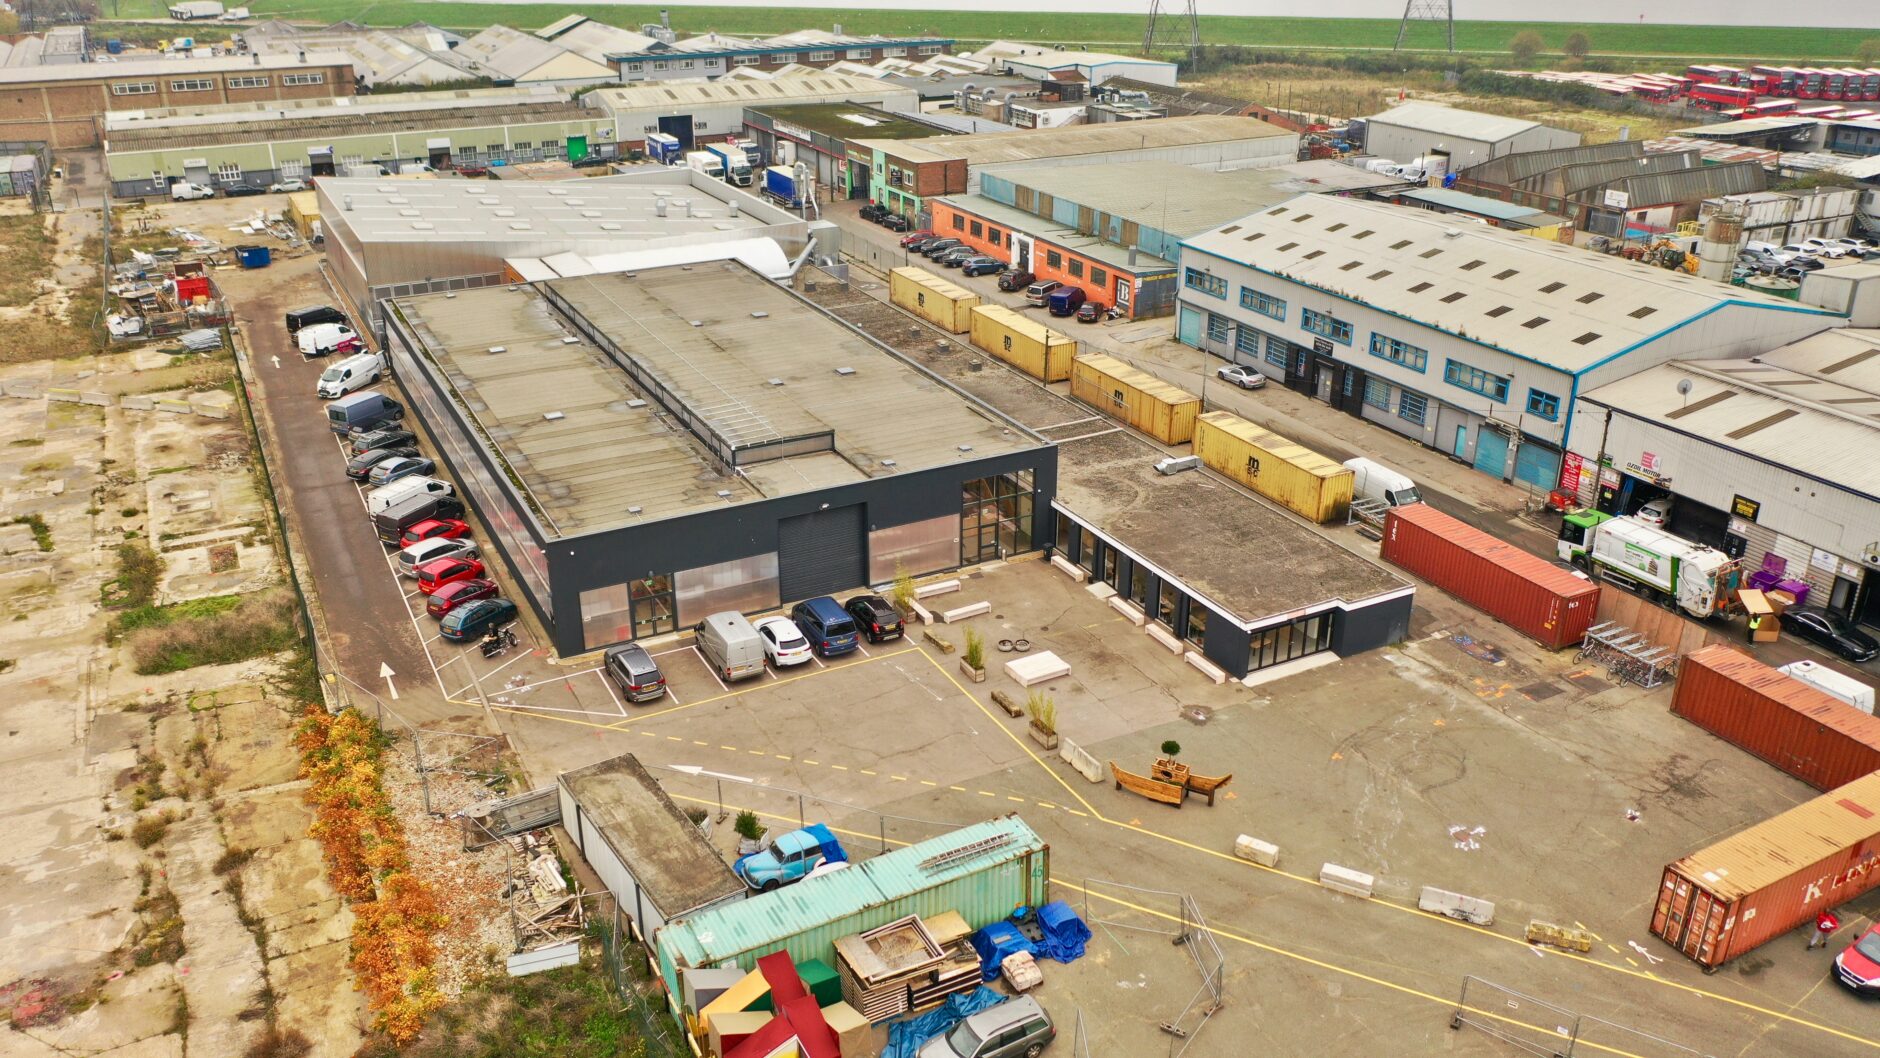 Aerial photo of Building Bloqs' new factory designed by architects and urban designers 5th Studio, at Meridian Water, Upper Edmonton. Photo: Alvie Hussein.